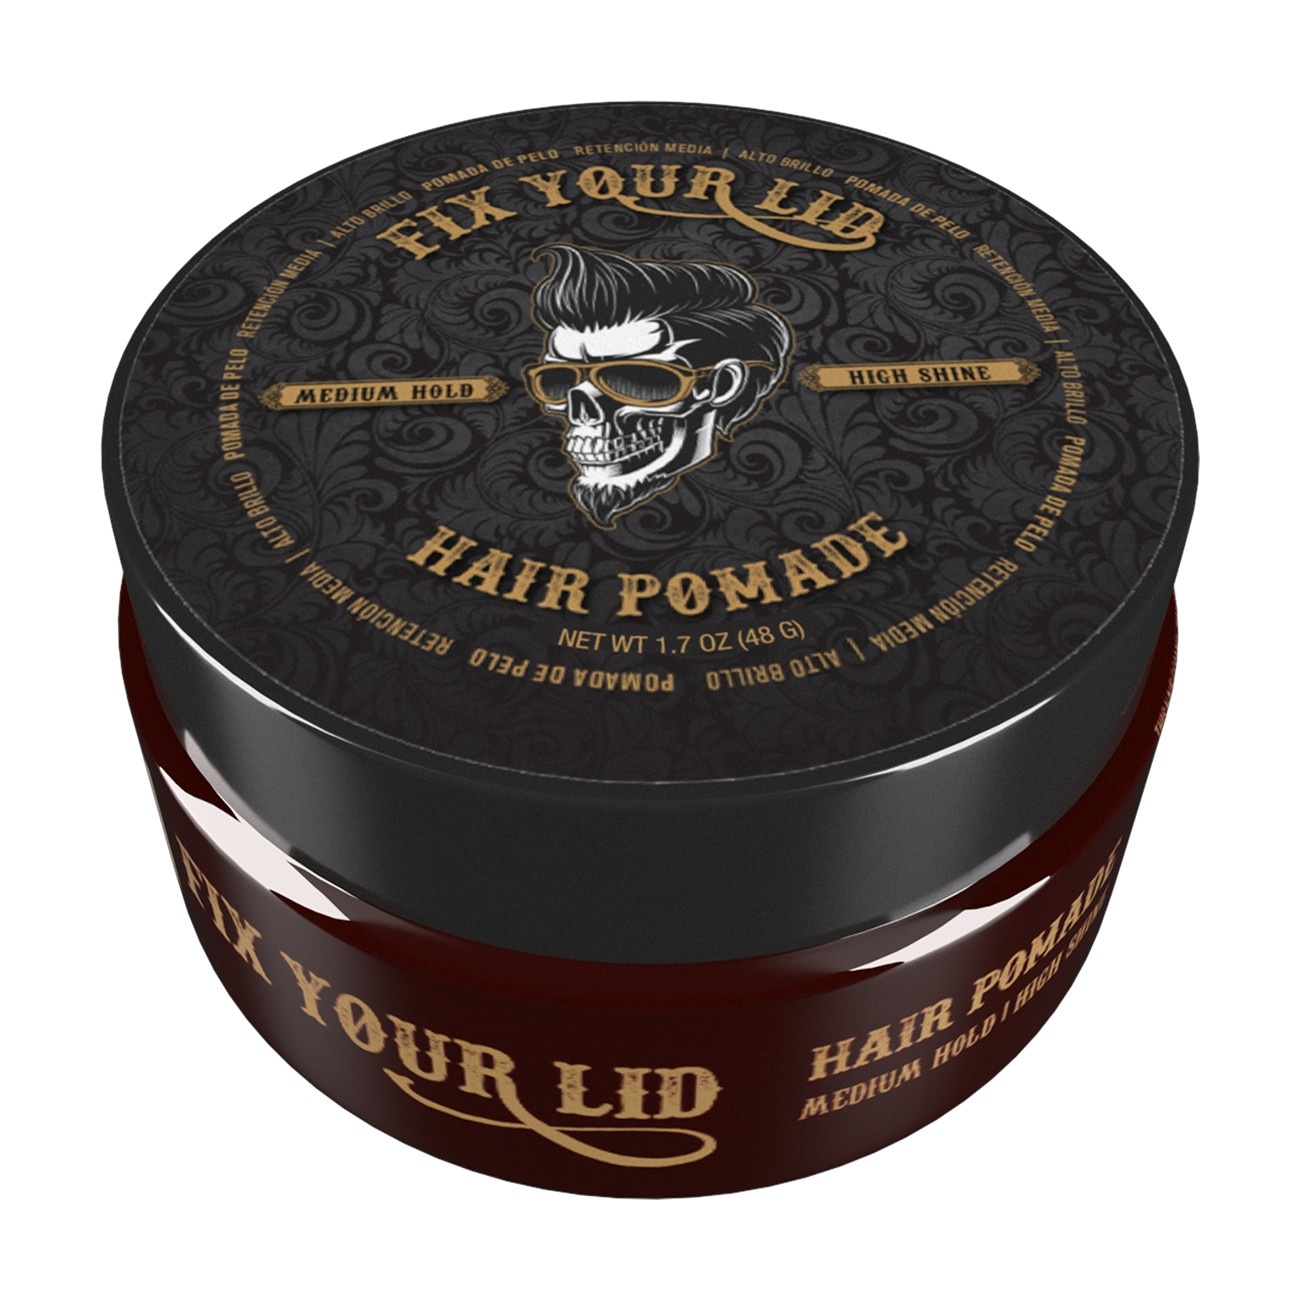 slide 1 of 1, Fix Your Lid Medium Hold High Shine Hair Pomade - Trial Size - 1.7oz, 1.7 oz